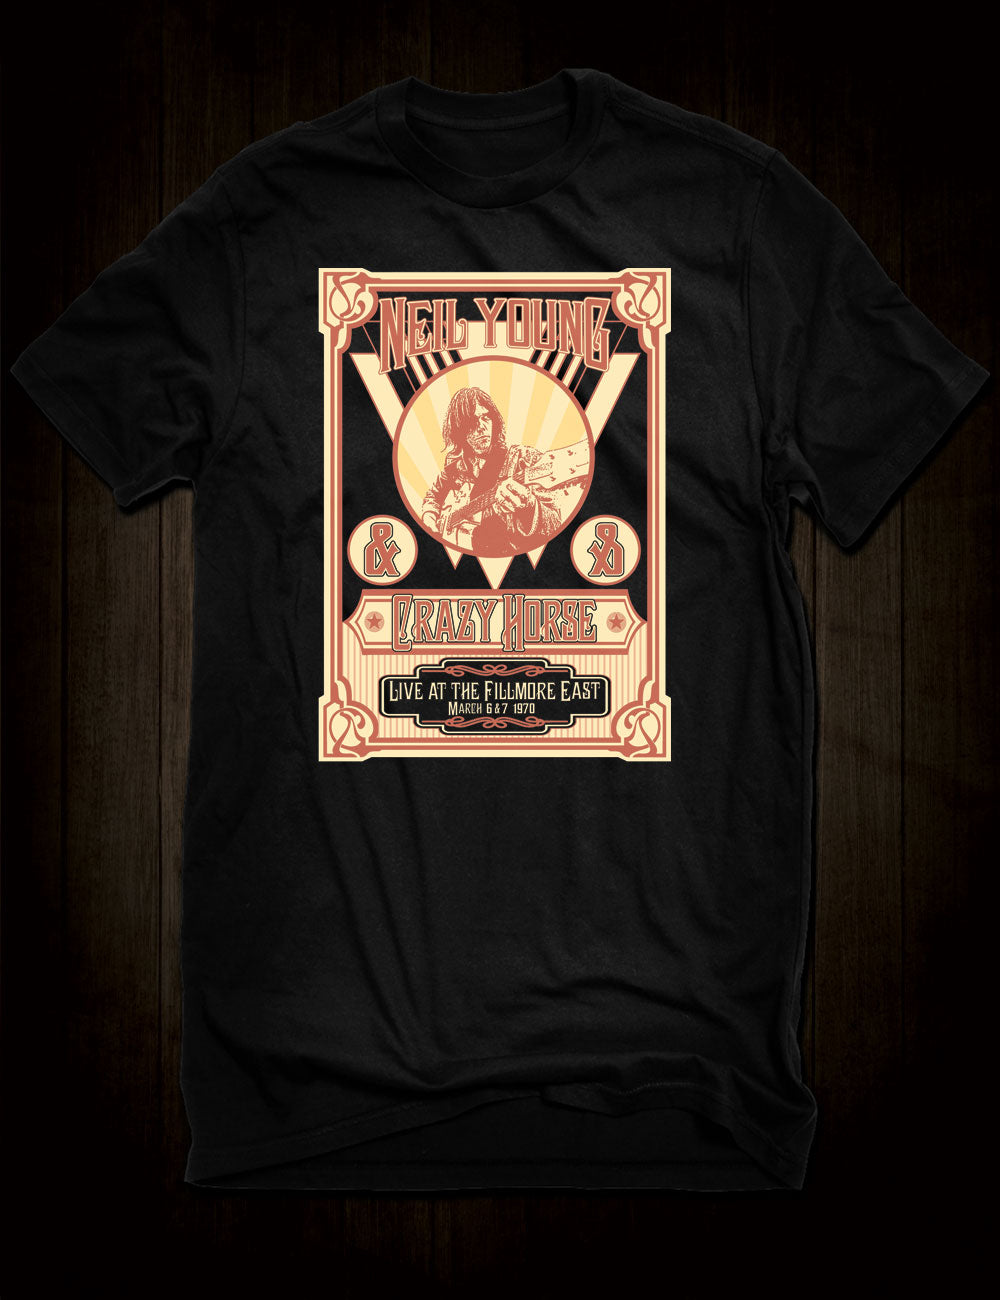 Neil Young & Crazy Horse Live At The Fillmore East T-Shirt